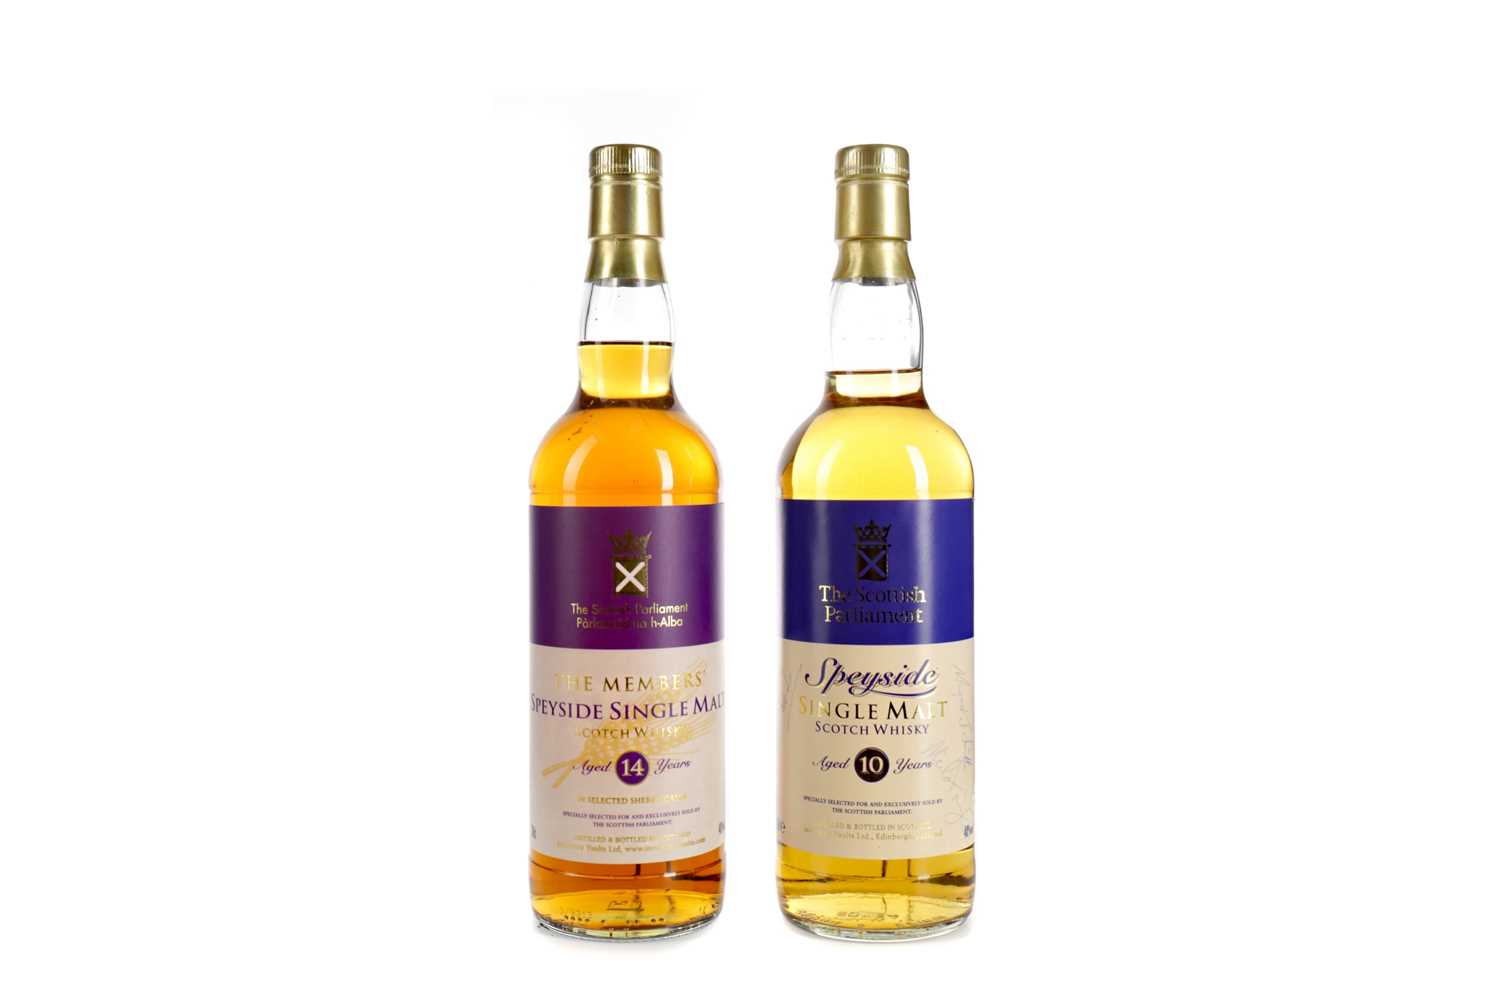 Lot 160 - THE MEMBERS SPEYSIDE AGED 14 YEARS AND SCOTTISH PARLIAMENT SPEYSIDE AGED 10 YEARS